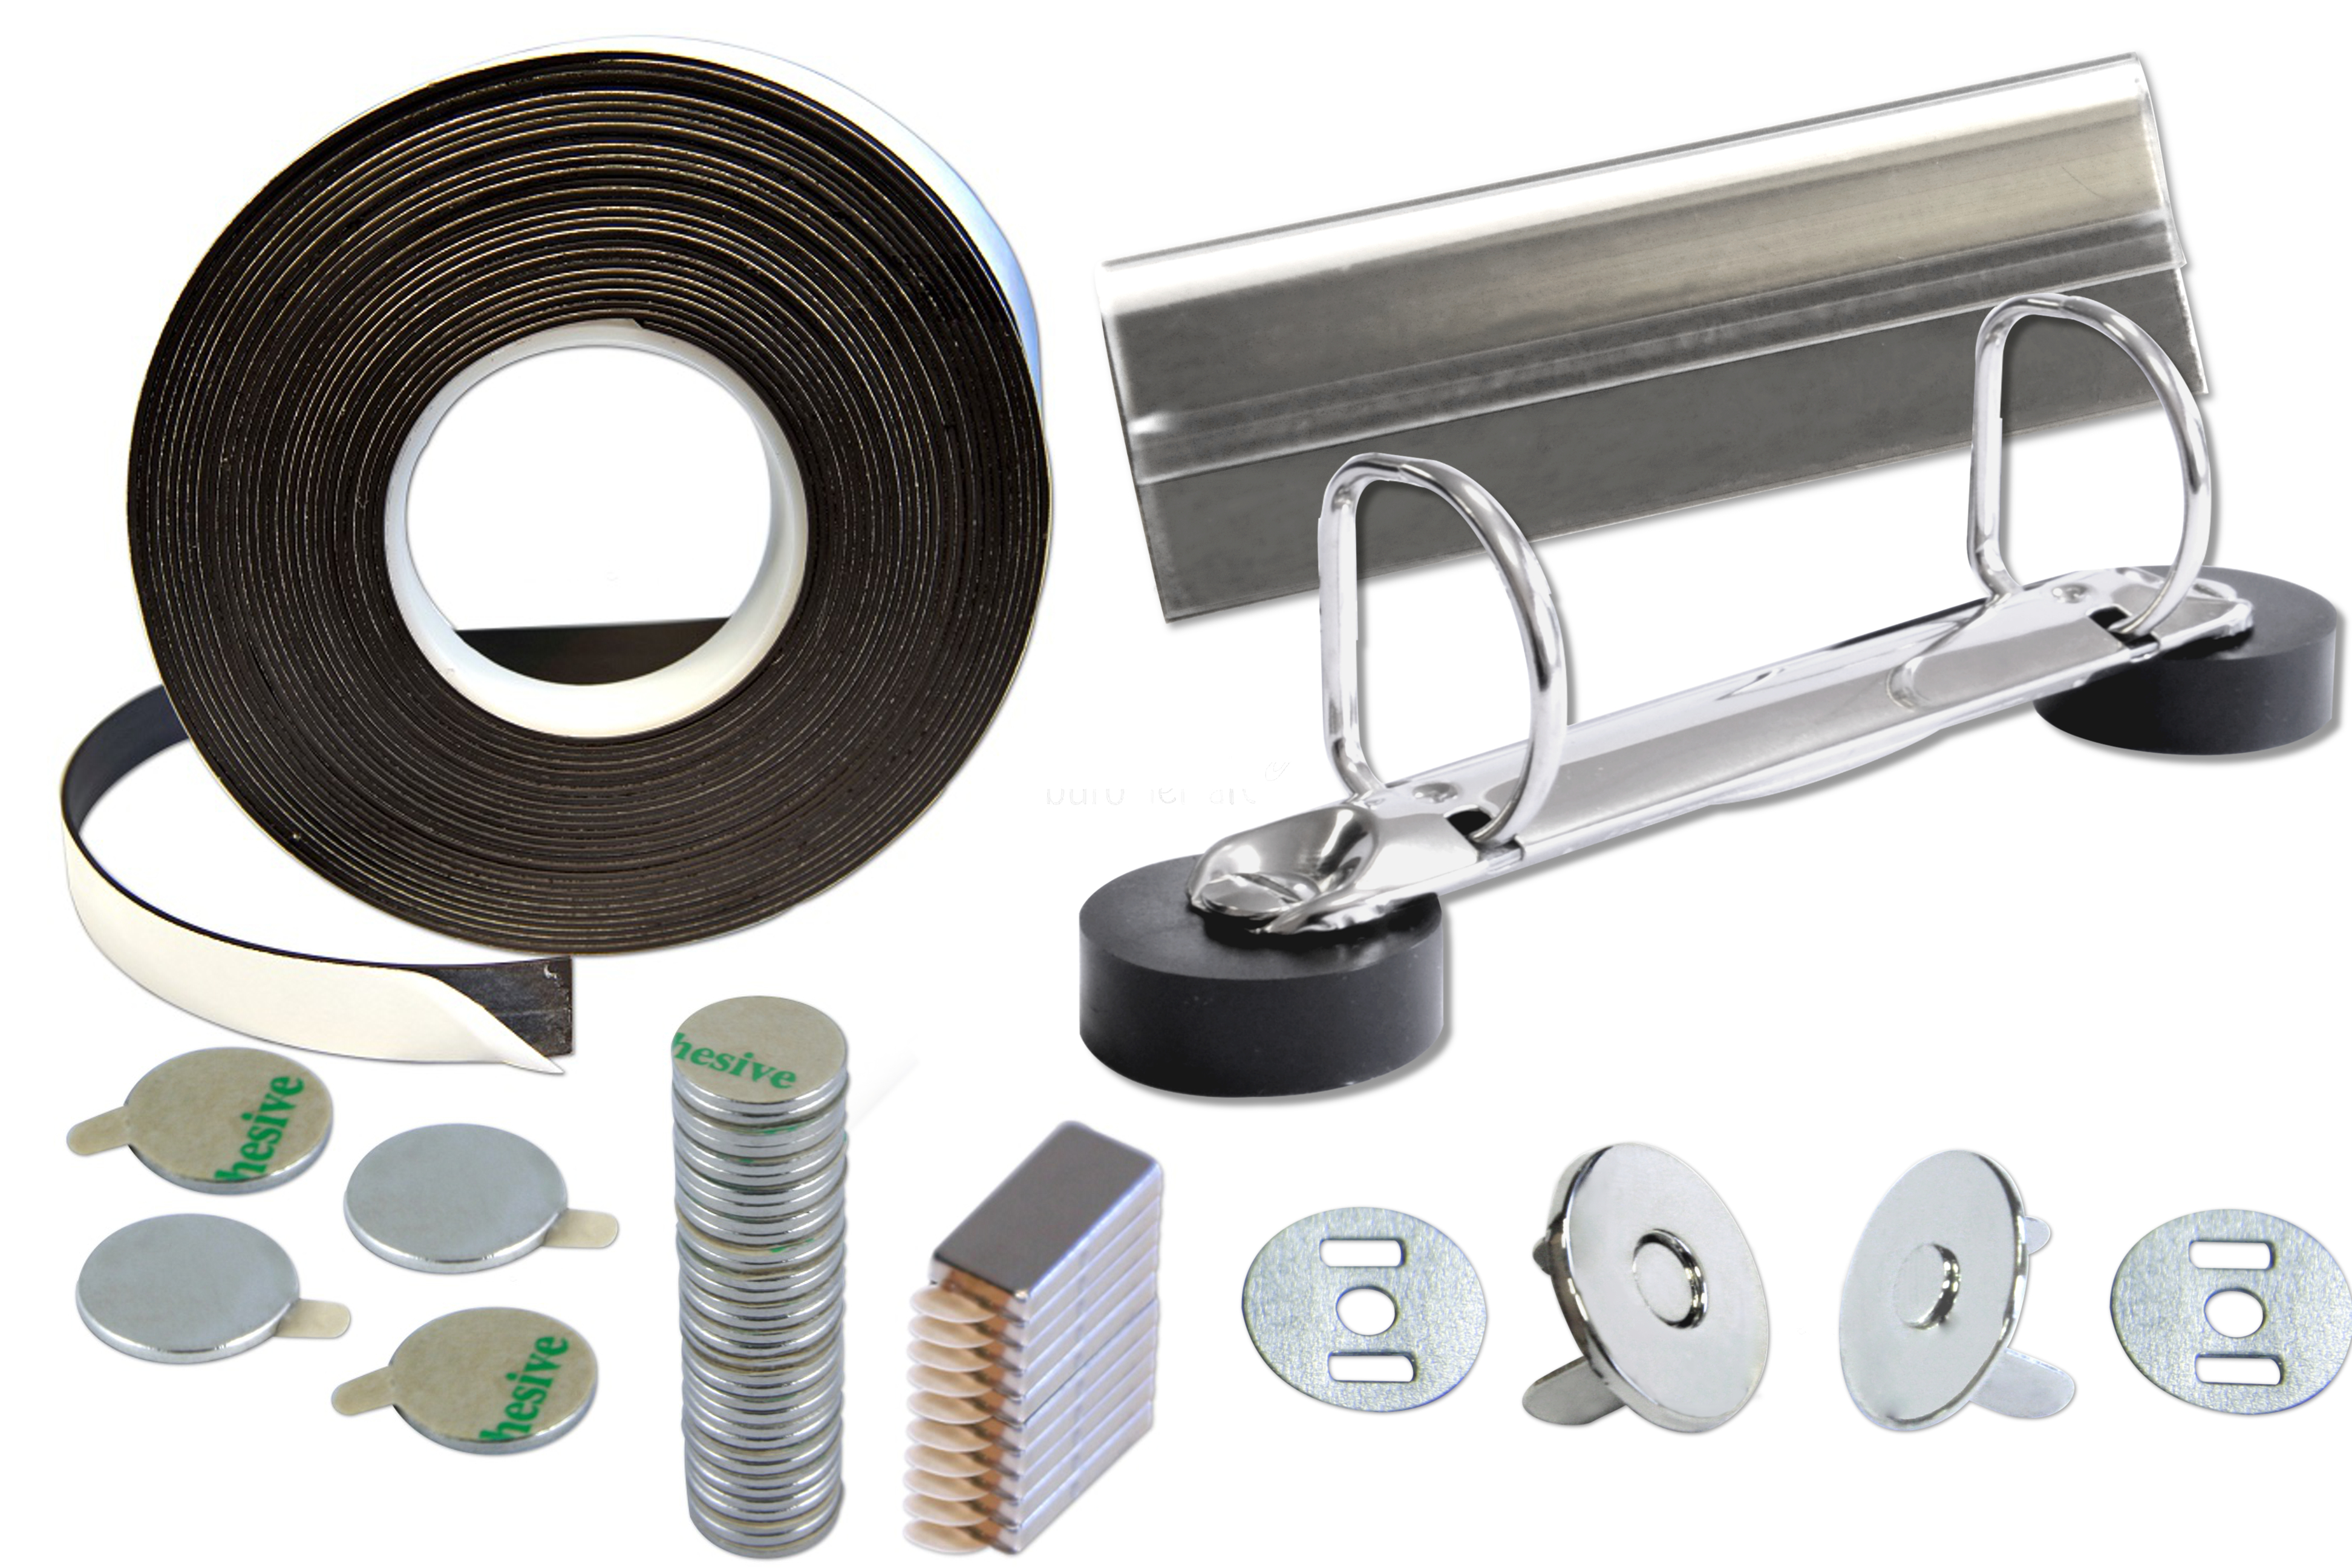 Tidick Neodymium magnets and other magnetic items